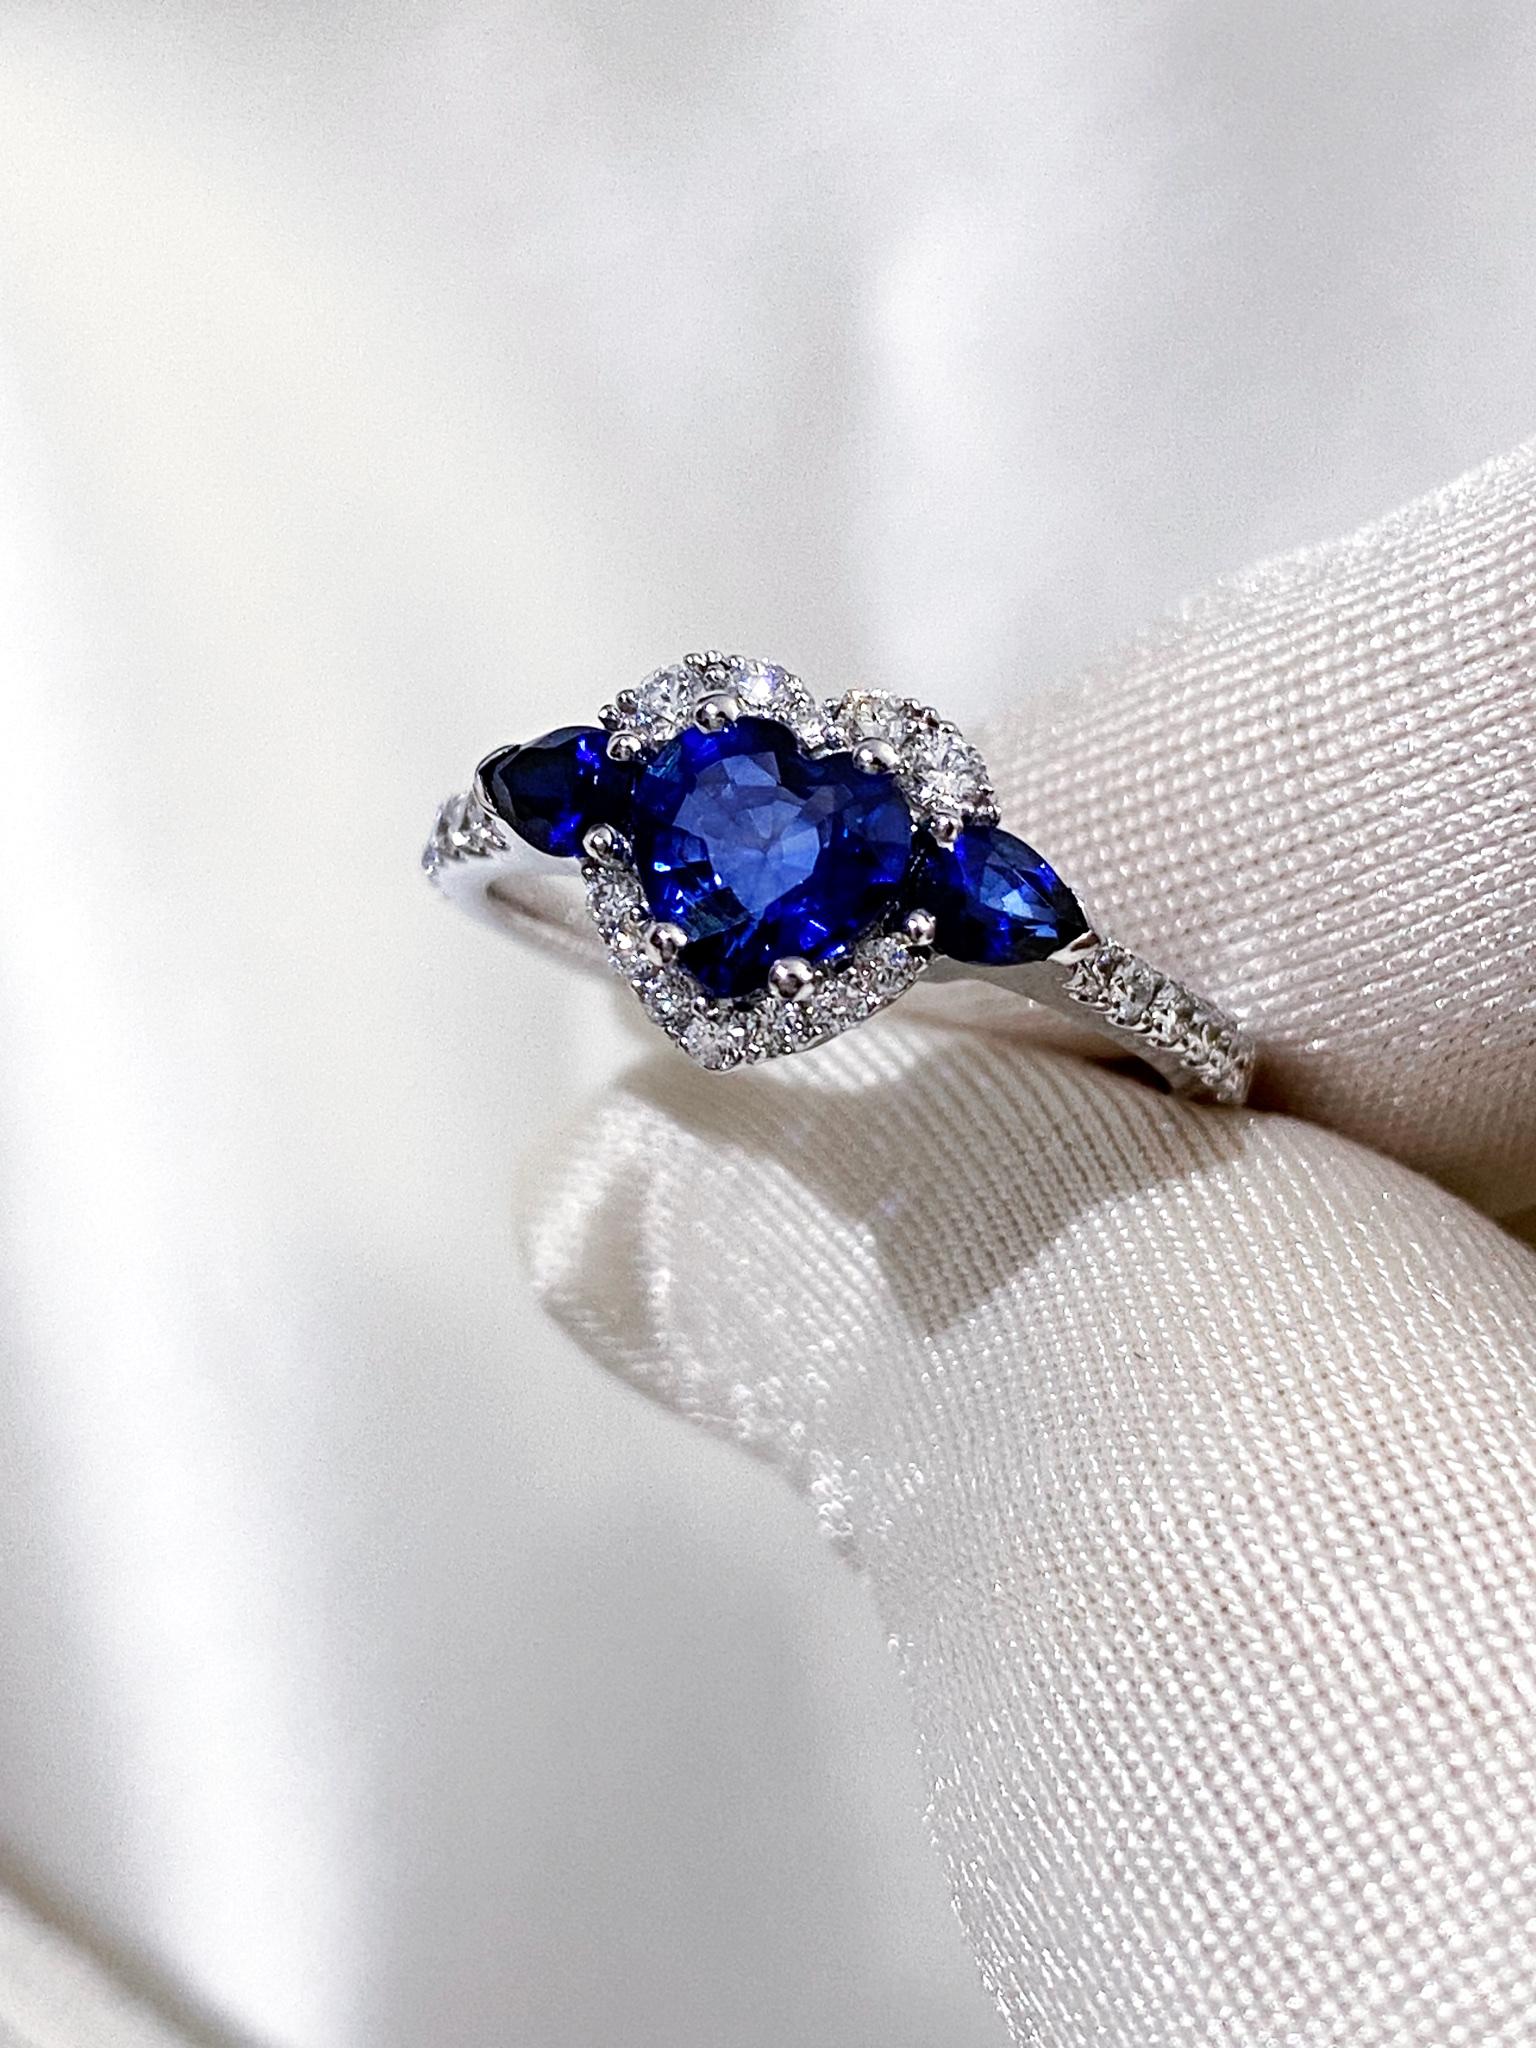 For Sale:  Heart Ring with Blue Sapphires and Diamonds, 18 Karat White Gold, Made in Italy 2